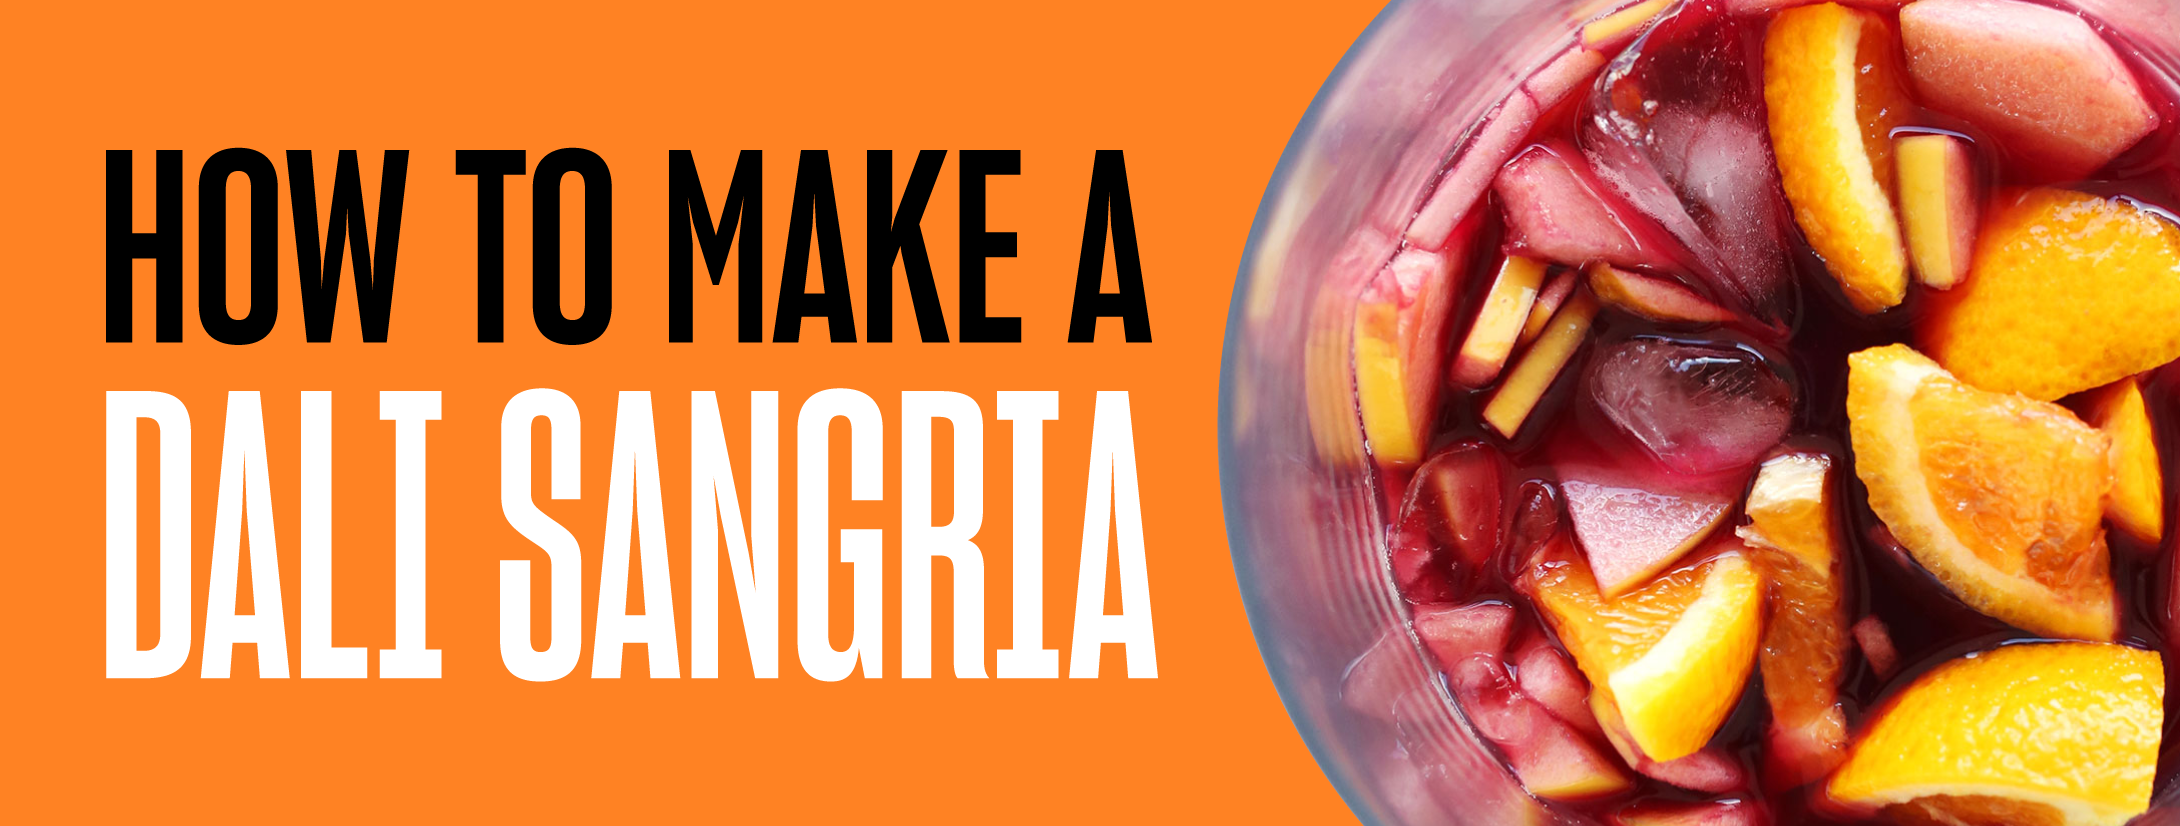 How to make sangria banner